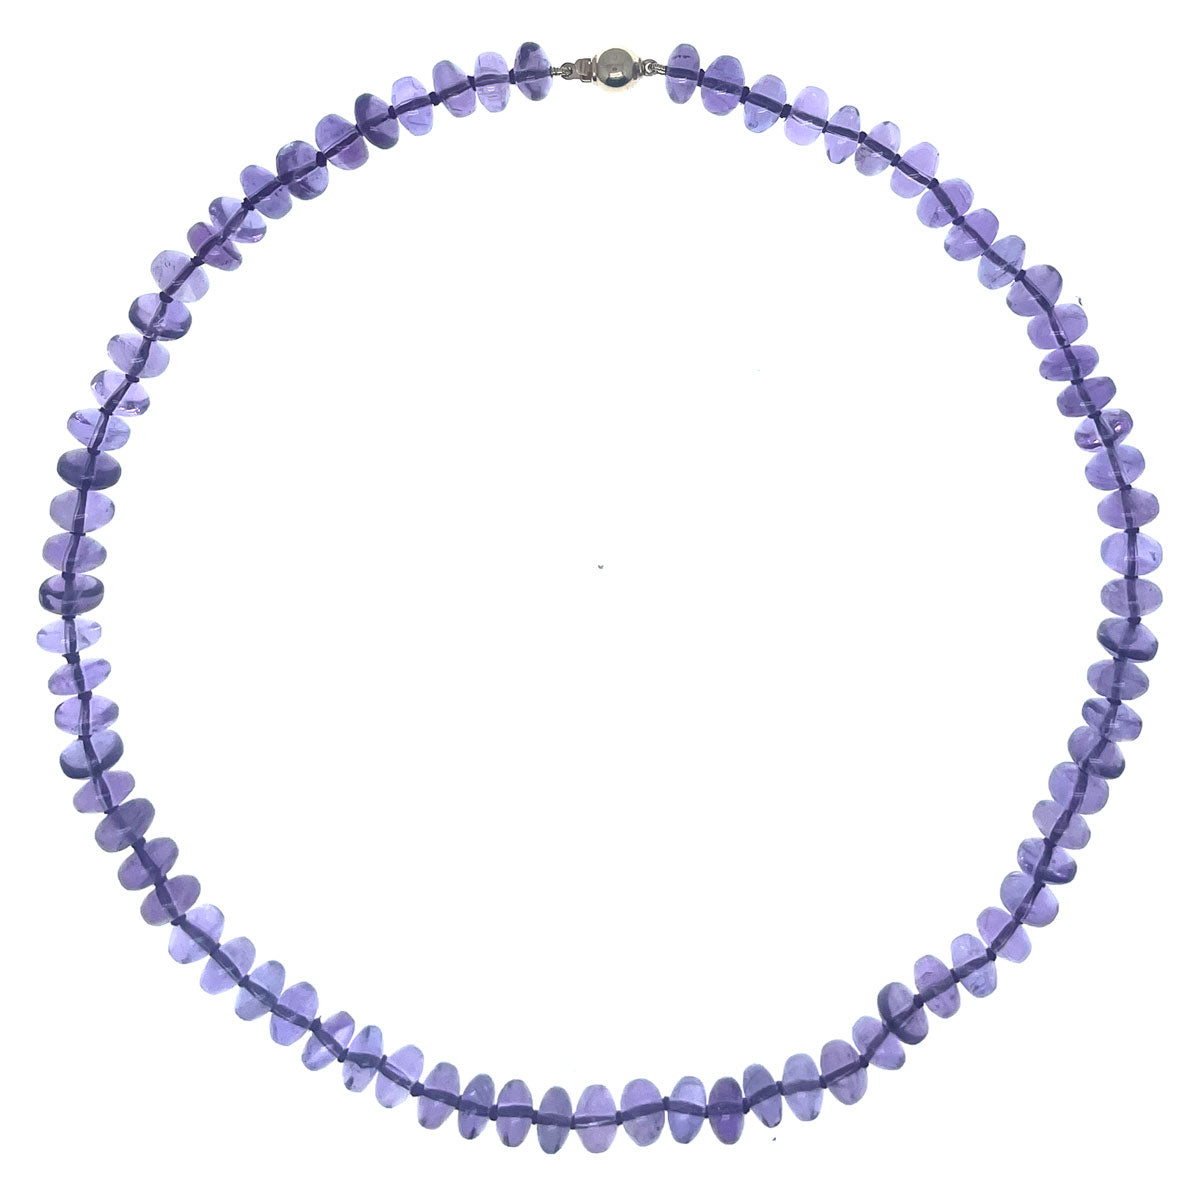 Beaded Amethyst Necklace